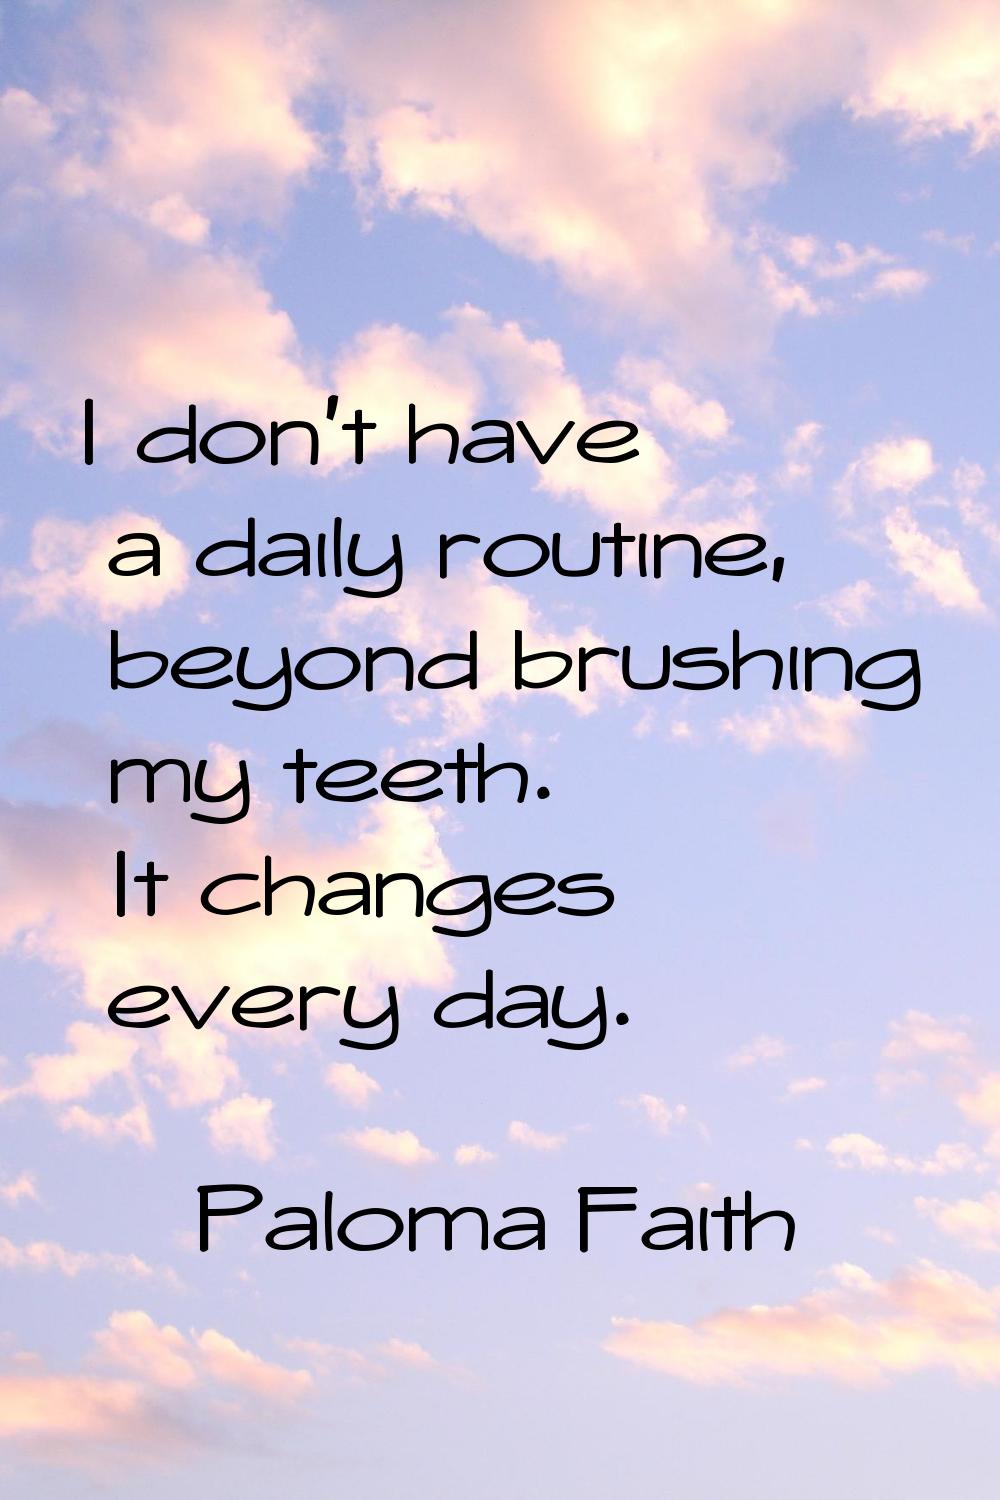 I don't have a daily routine, beyond brushing my teeth. It changes every day.